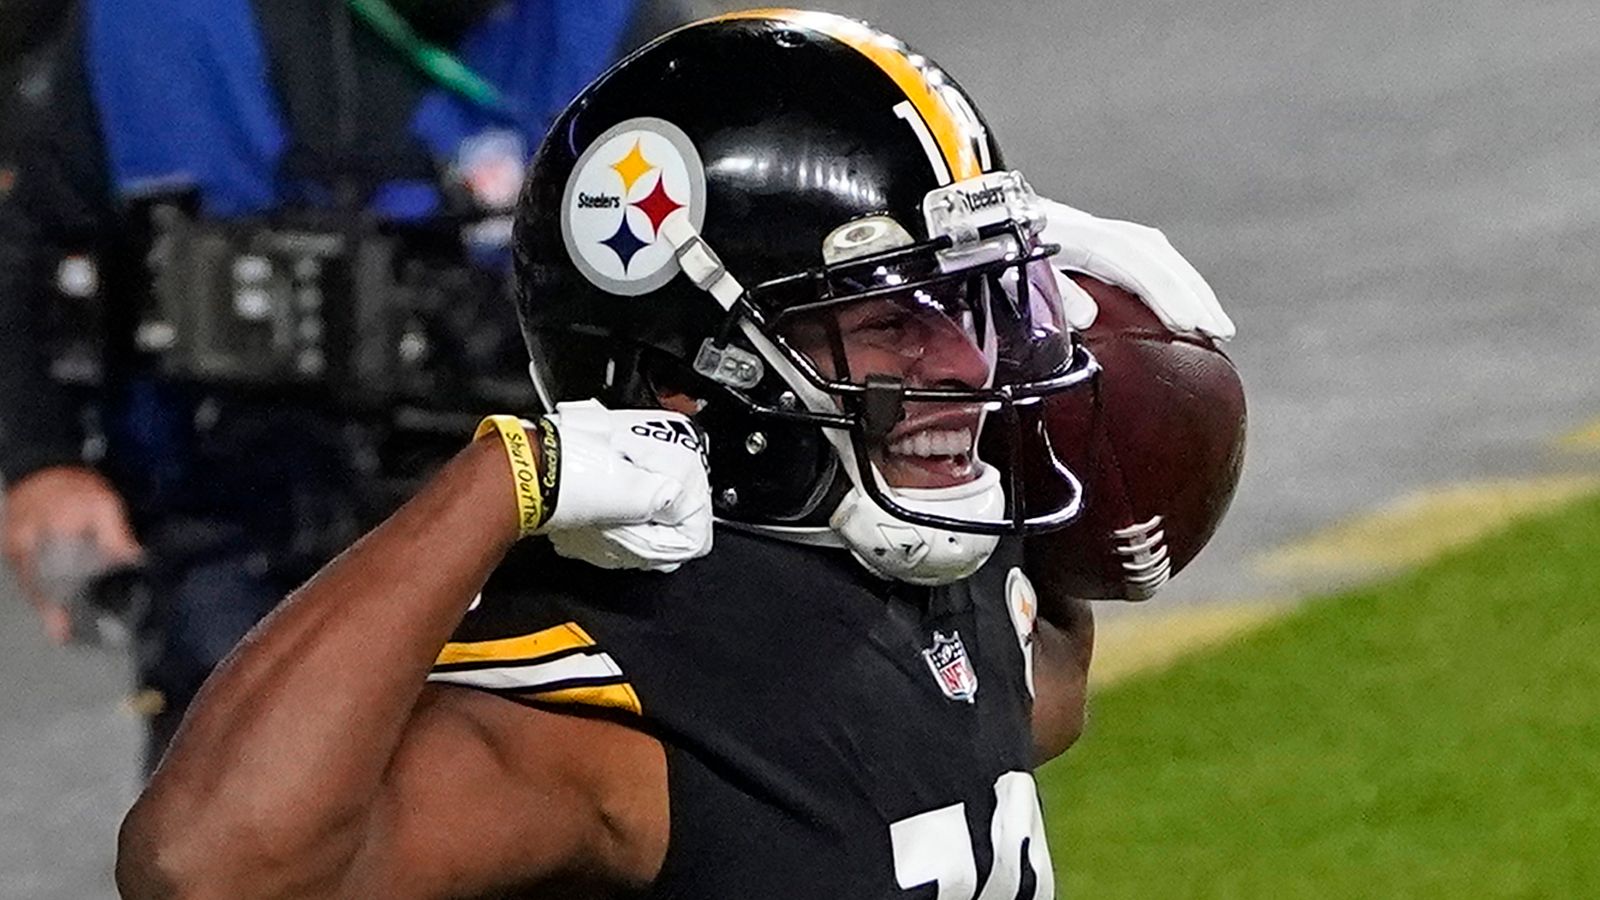 JuJu Smith-Schuster to join Pittsburgh Steelers after agreeing to NFL News’ one-year deal